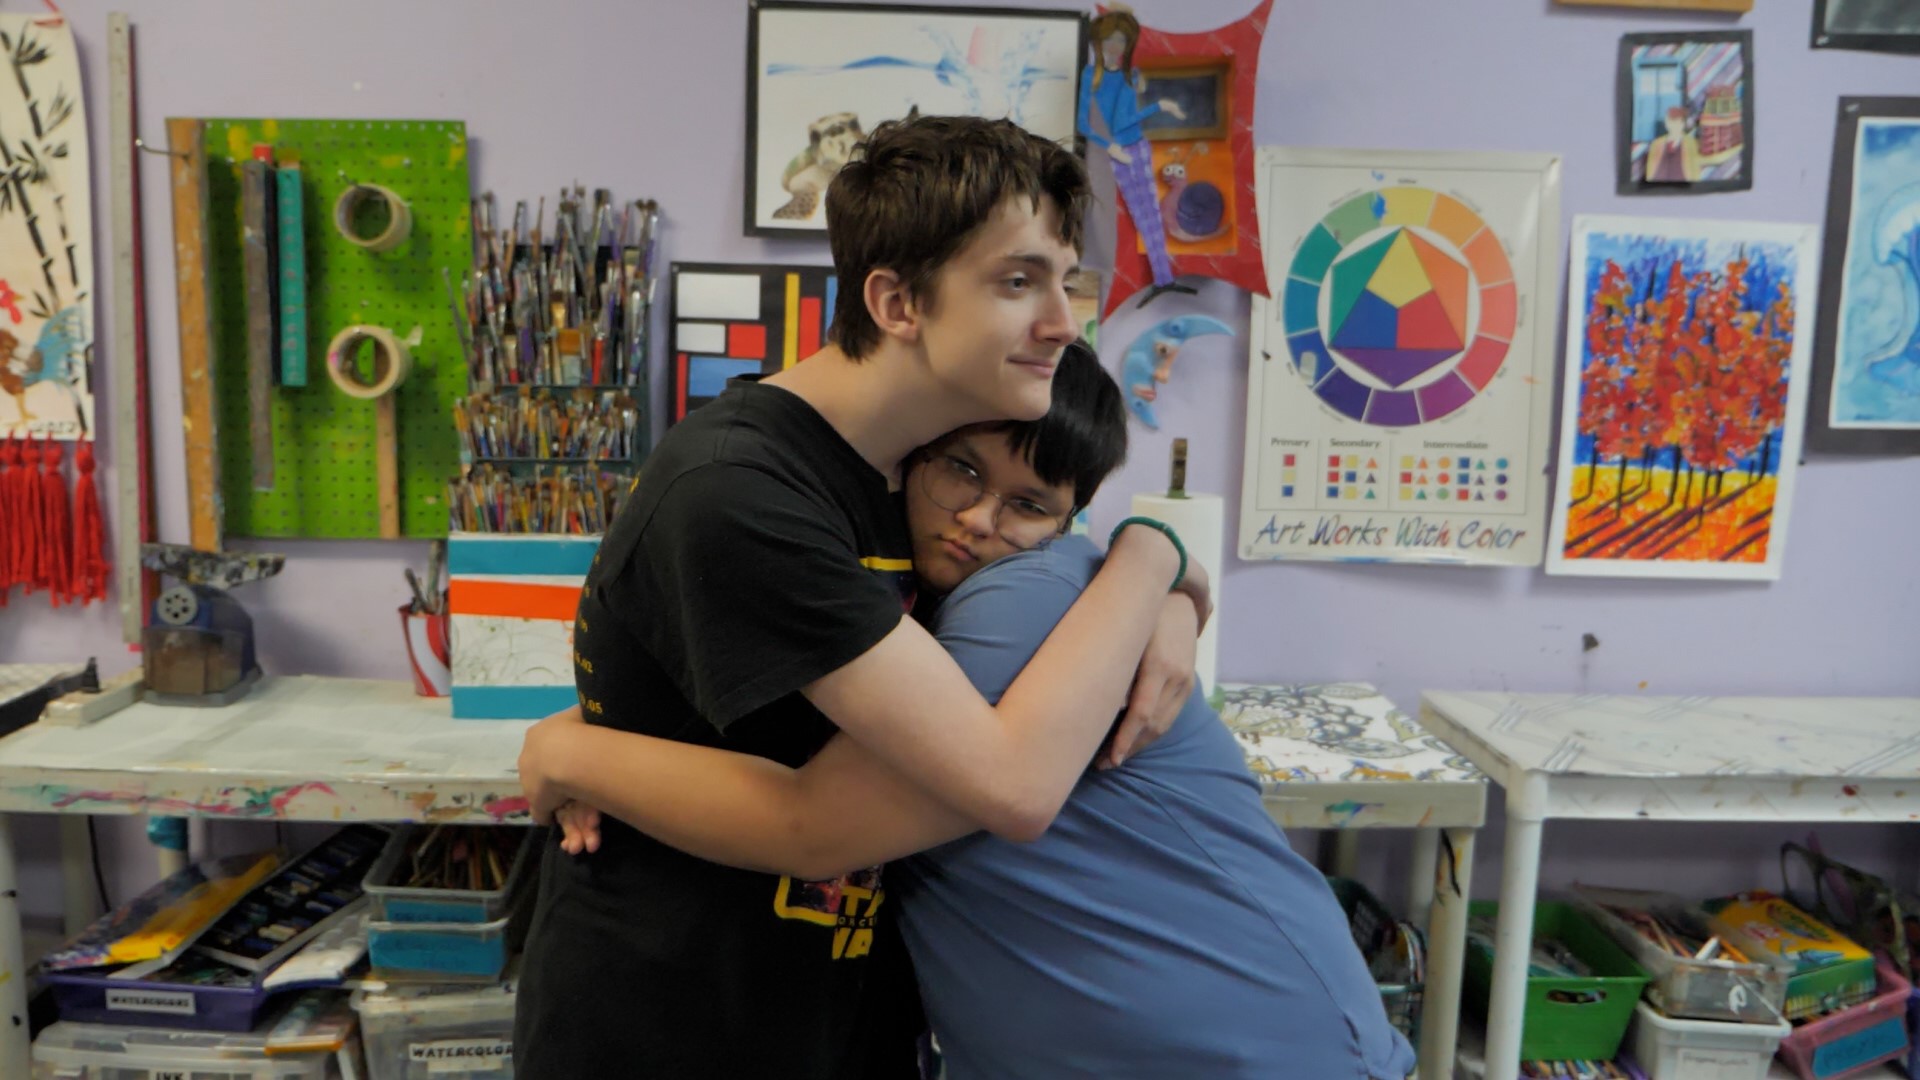 Collin and Damien are teenagers separated in foster care. But they have fierce advocates doing everything they can to find them a forever family -- together.